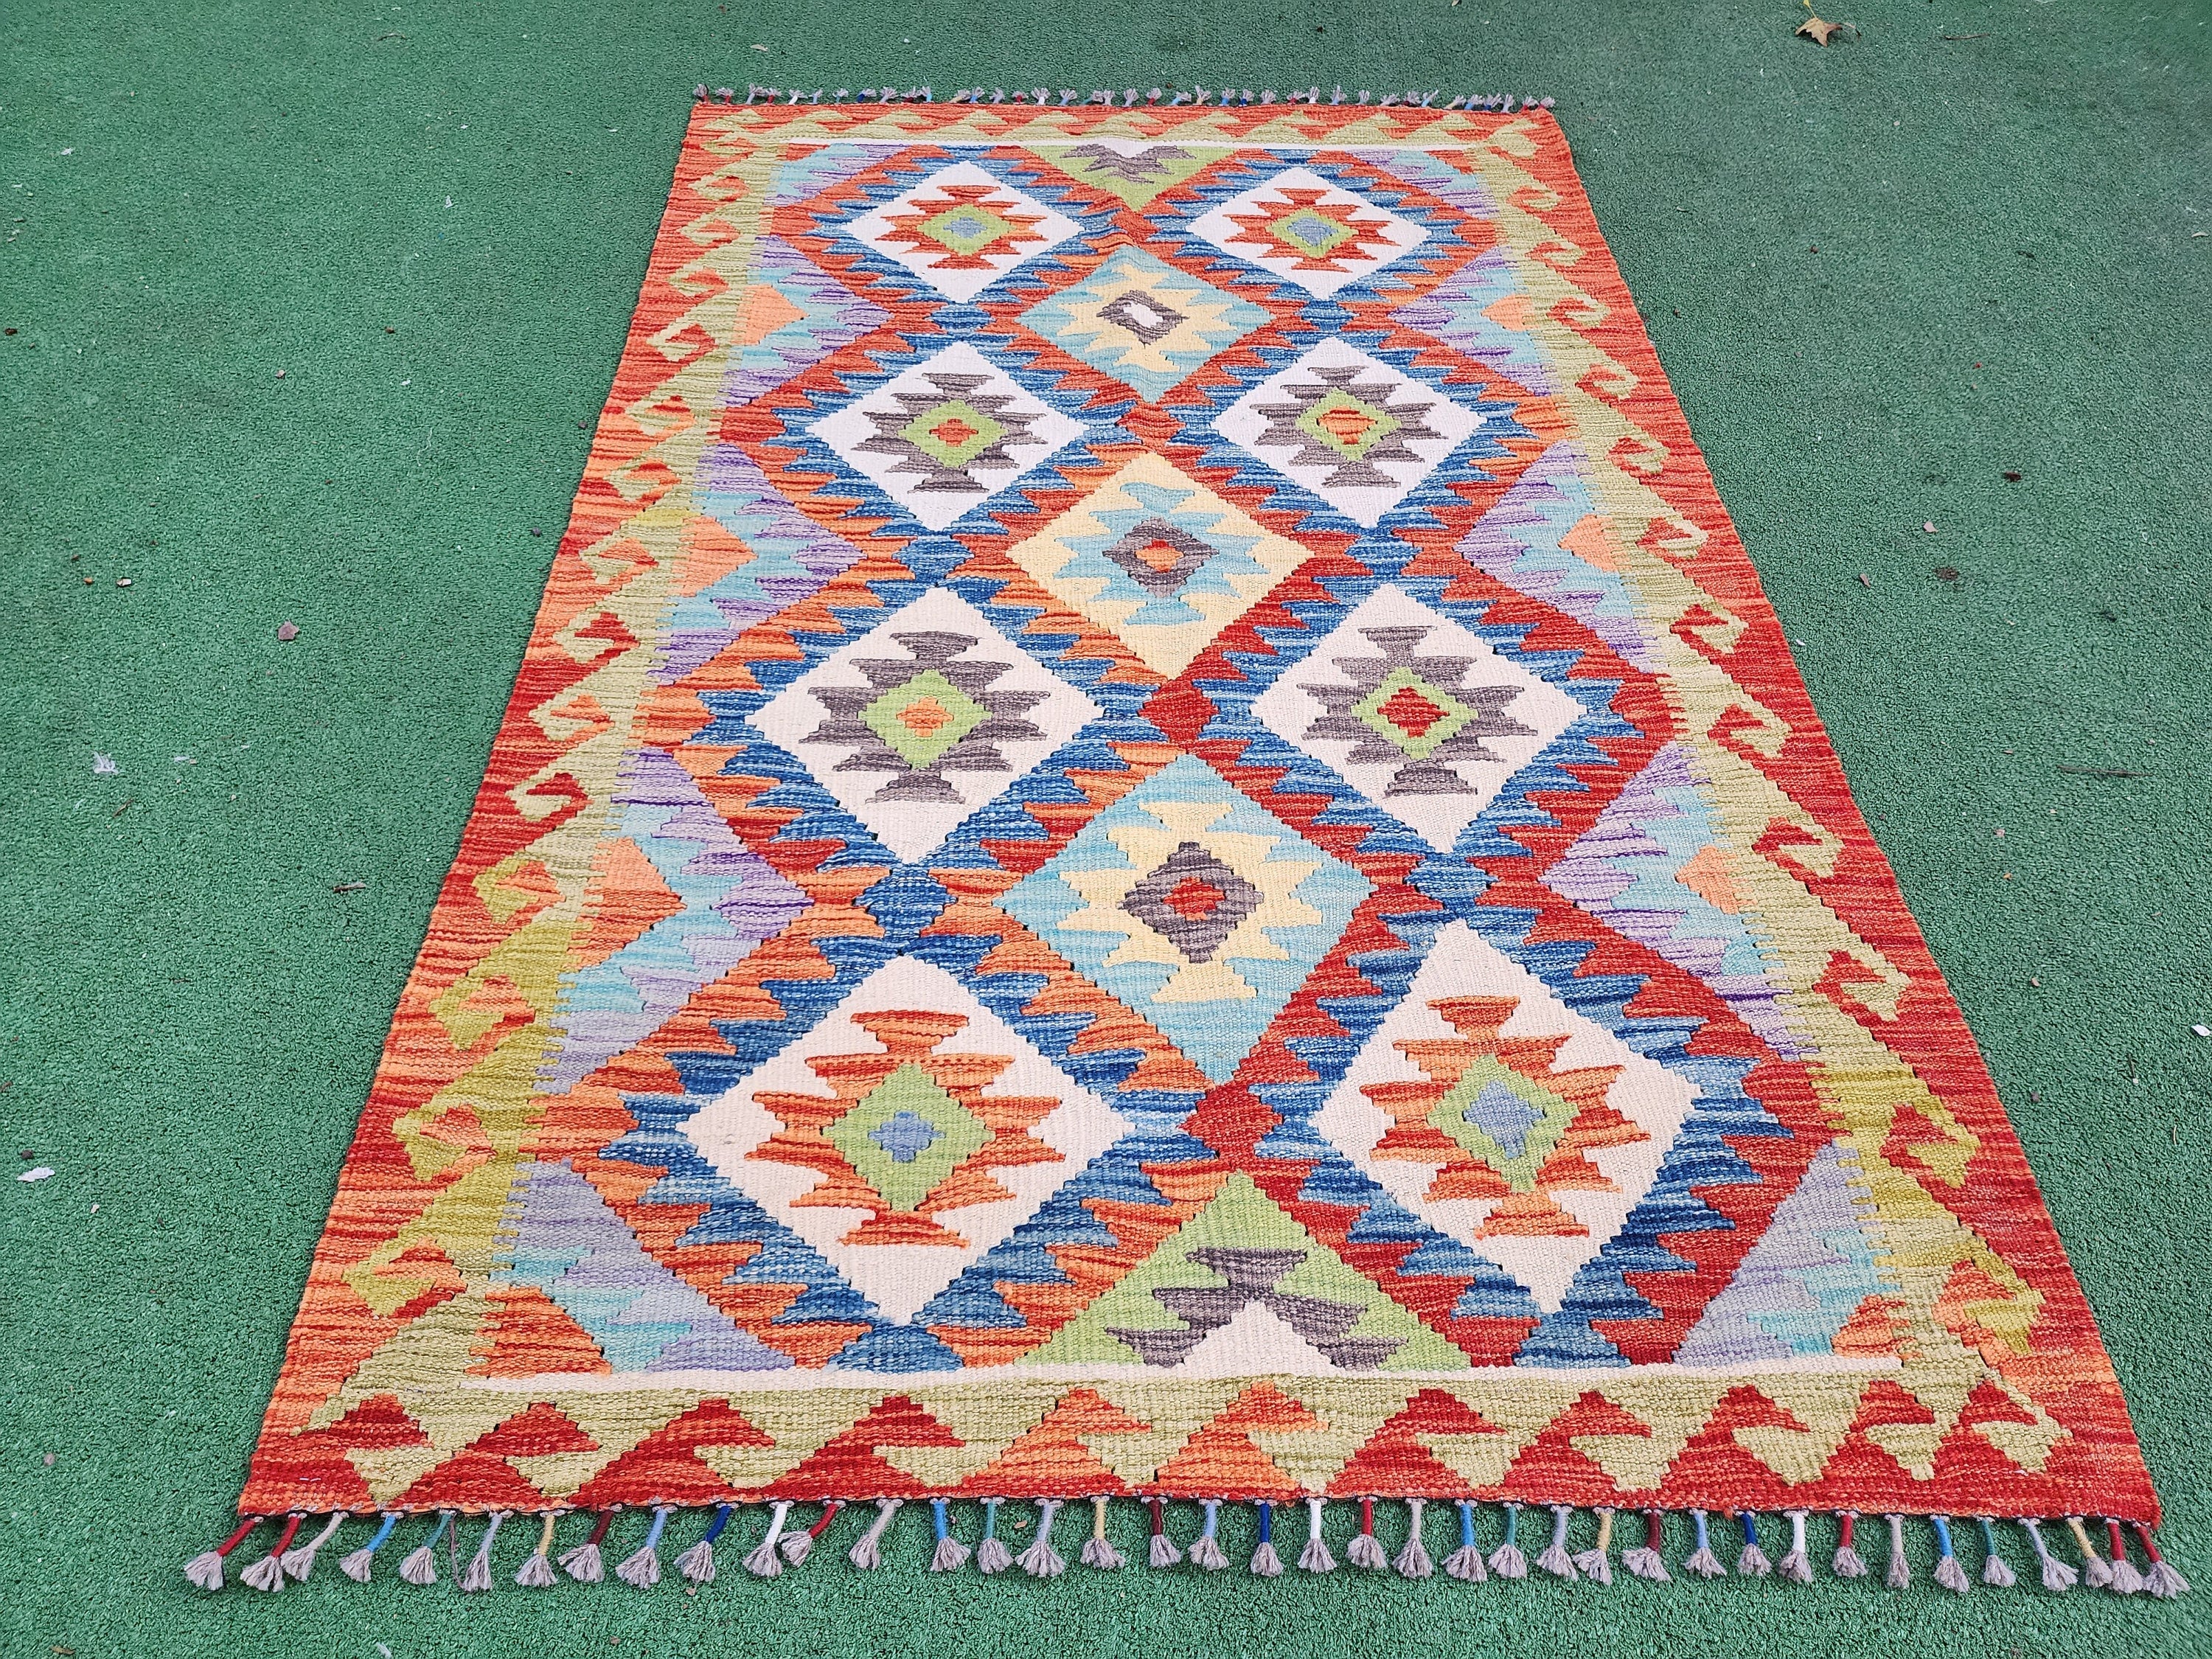 Afghan Kilim Rug,5 ft 3 in x 3 ft 4 in, Rust Red, Blue and Off-White Contemporary Turkish Rug